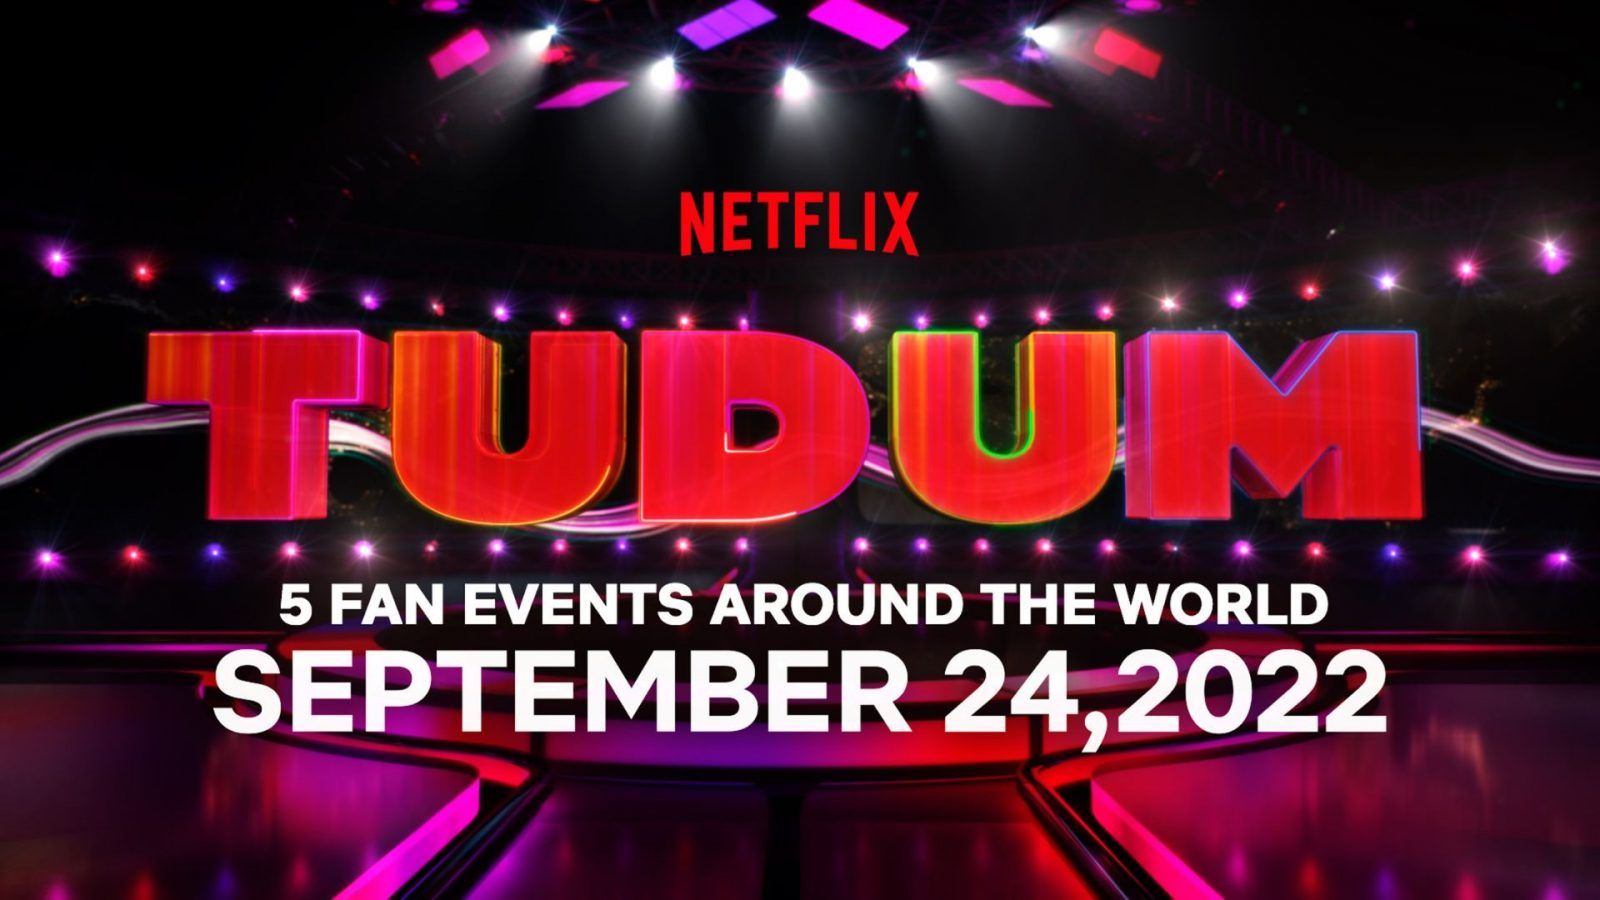 Netflix’s Tudum event returns for a second edition in September